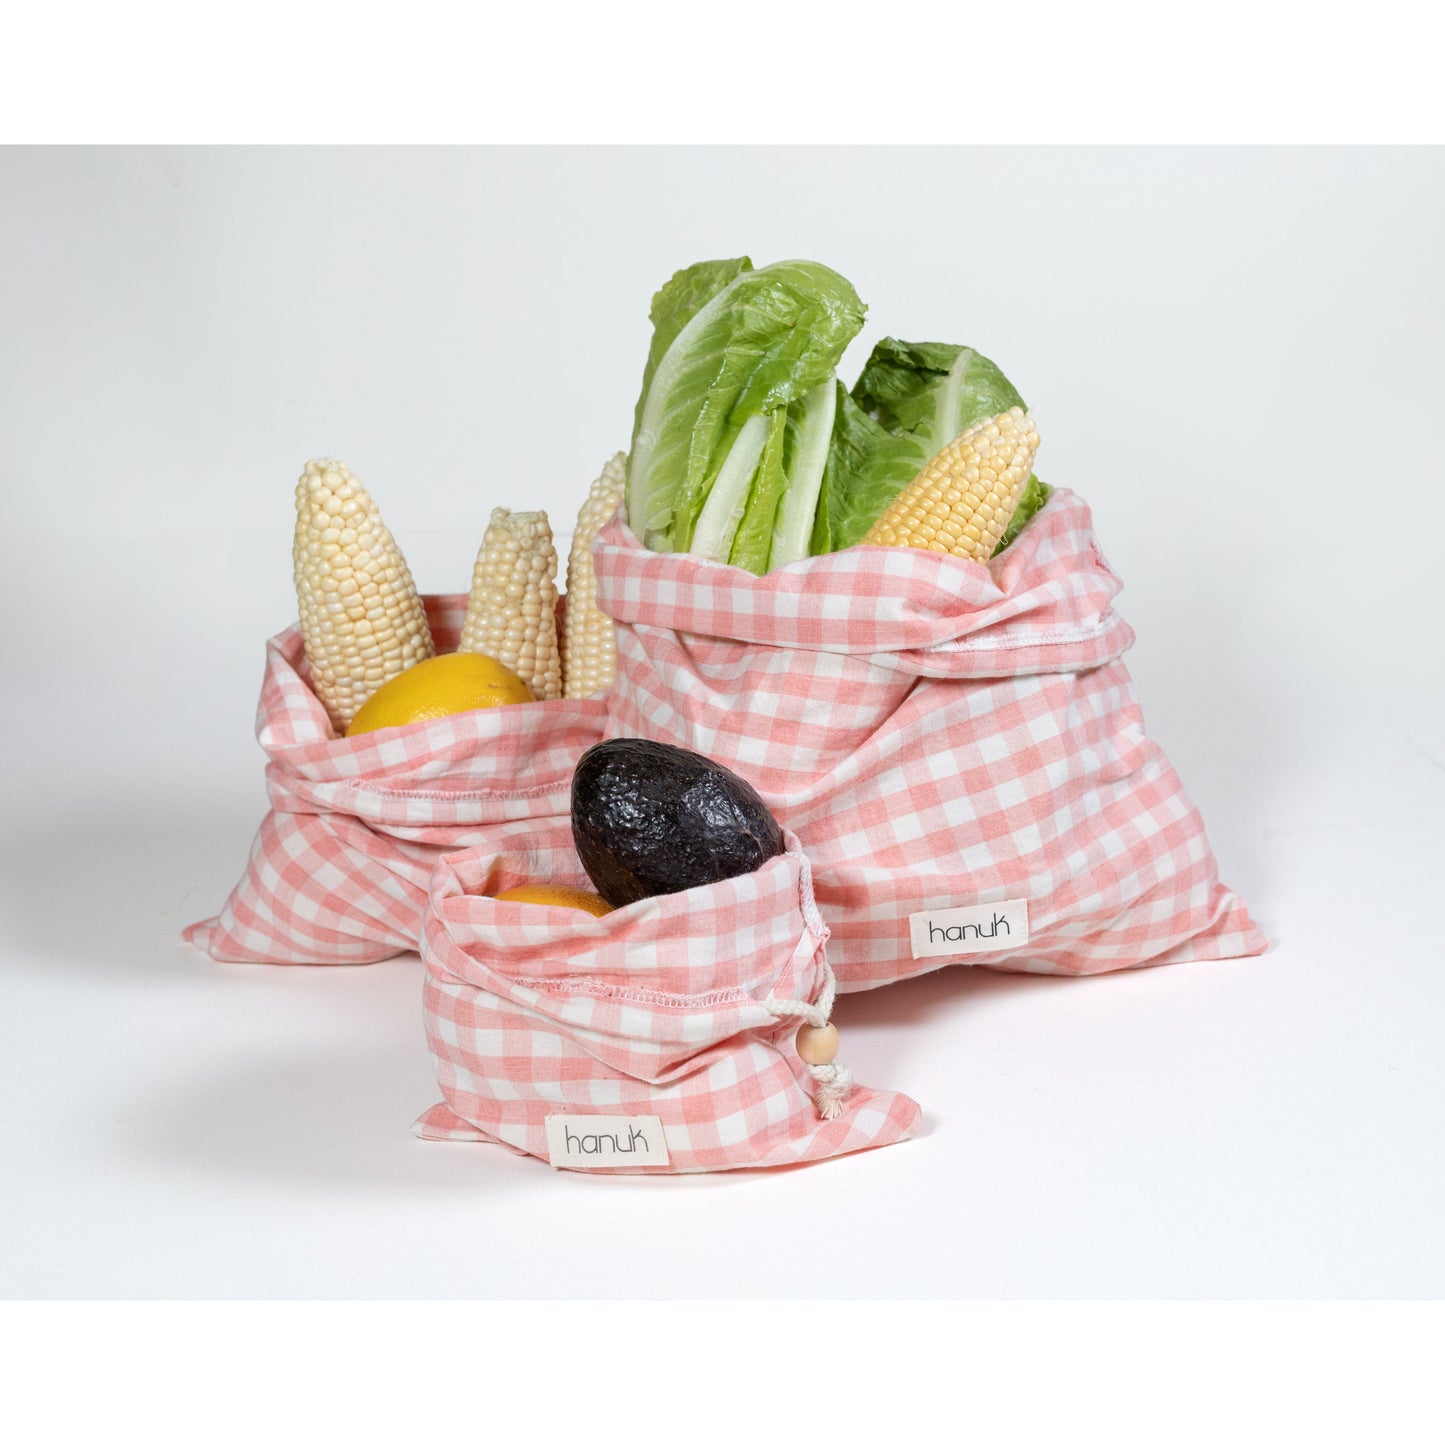 pink reusable produce bags. gift bags. travel bags.